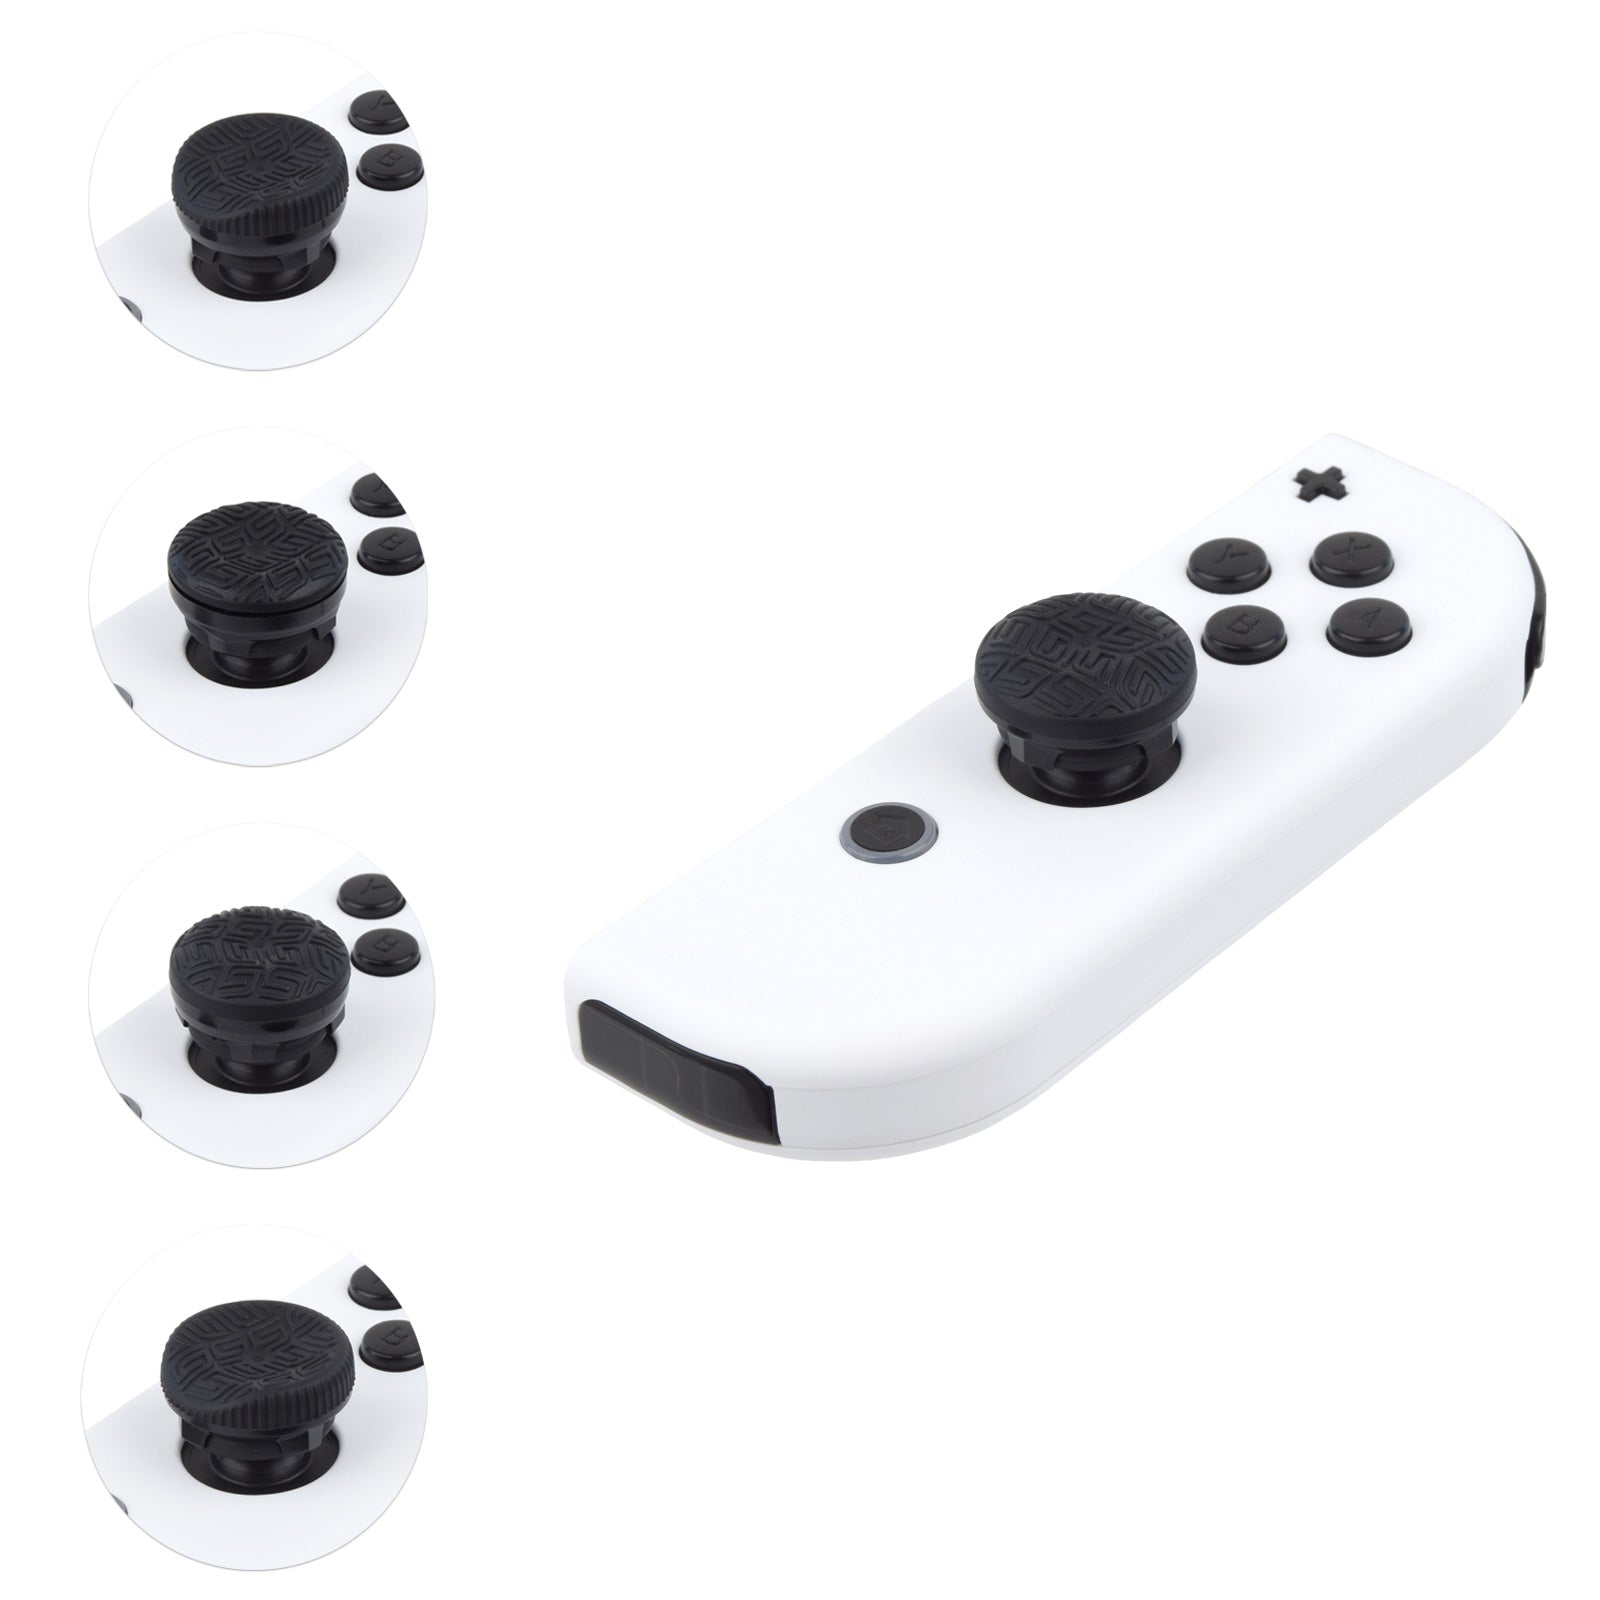 Skull & Co. JoyCon Replacement Joystick Covers Repair Parts for Nintendo  Switch and Switch OLED Joy-Con Controller